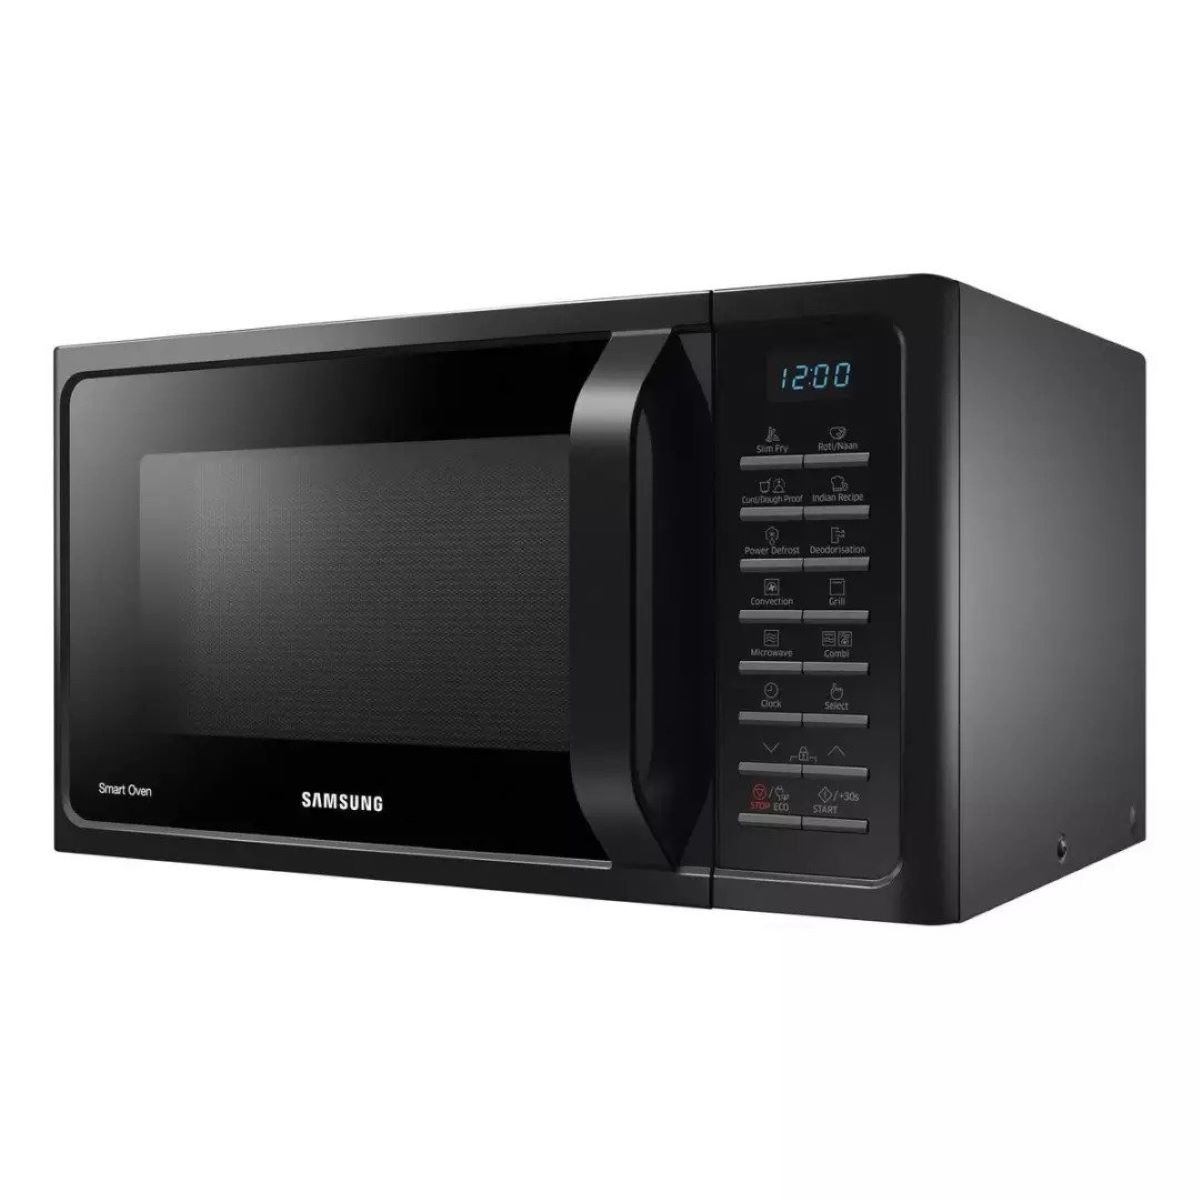 How To Fix The Error Code E-75 For Samsung Convection Oven